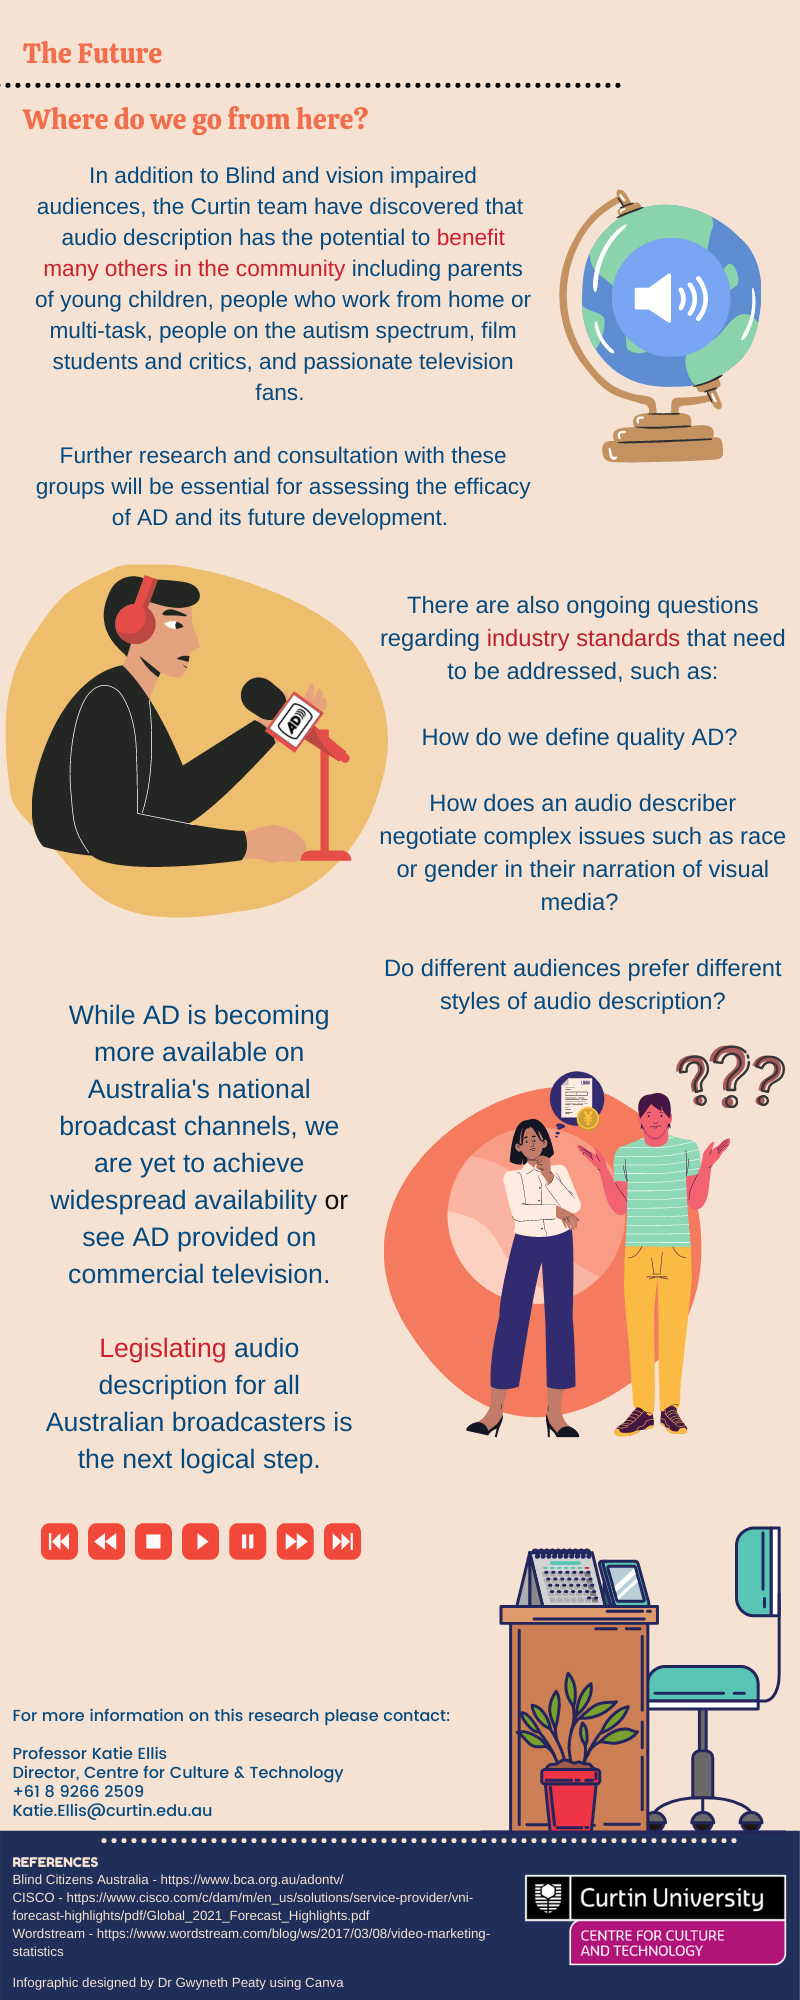 Infographic page 4. Images include a small globe of the Earth and a man speaking into a microphone with 'AD' on it. Image text: The Future: Where do we go from here? In addition to Blind and vision impaired audiences, the Curtin team have discovered that audio description has the potential to benefit many others in the community including parents of young children, people who work from home or multi-task, people on the autism spectrum, film students and critics, and passionate television fans. Further research and consultation with these groups will be essential for assessing the efficacy of AD and its future development. There are also ongoing questions regarding industry standards that need to be addressed, such as: How do we define quality AD? How does an audio describer negotiate complex issues such as race or gender in their narration of visual media? Do different audiences prefer different styles of audio description? While AD is becoming more available on Australia's national broadcast channels, we are yet to achieve widespread availability or see AD provided on commercial television. Legislating audio description for all Australian broadcasters is the next logical step.